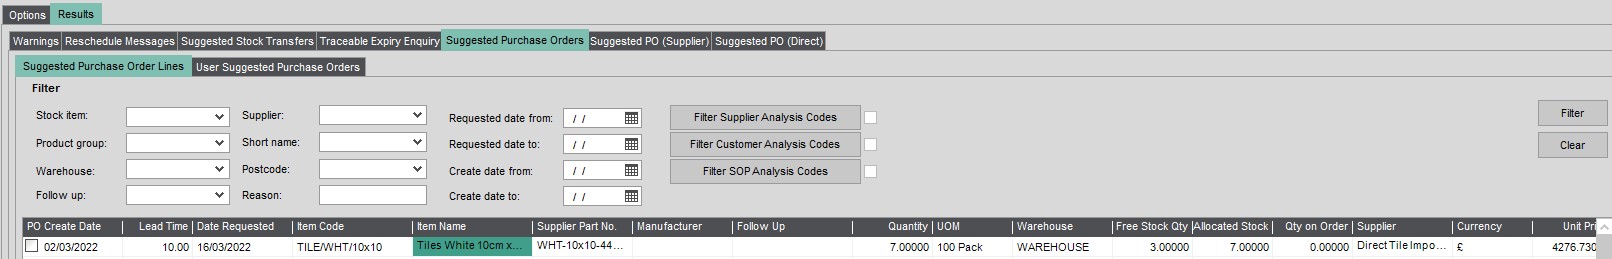 Sicon Distribution MRP - Section 1.2.5.6 Image 2